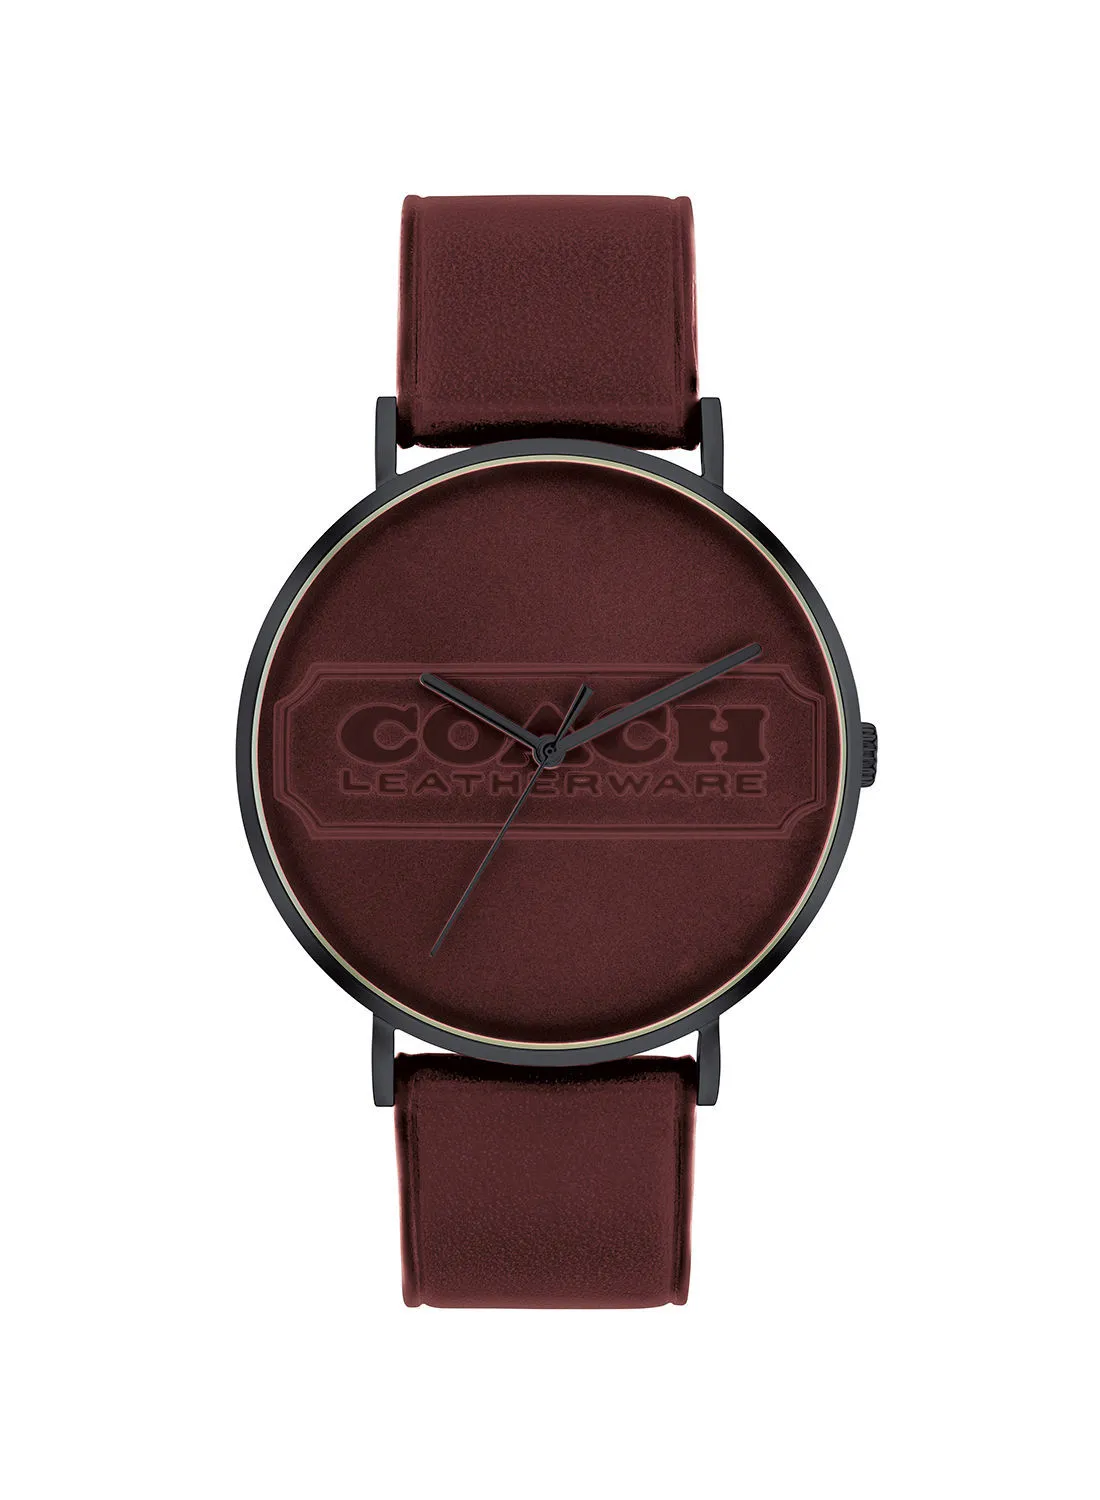 COACH Watches Charles Men's Leather Wrist Watch - 14602598